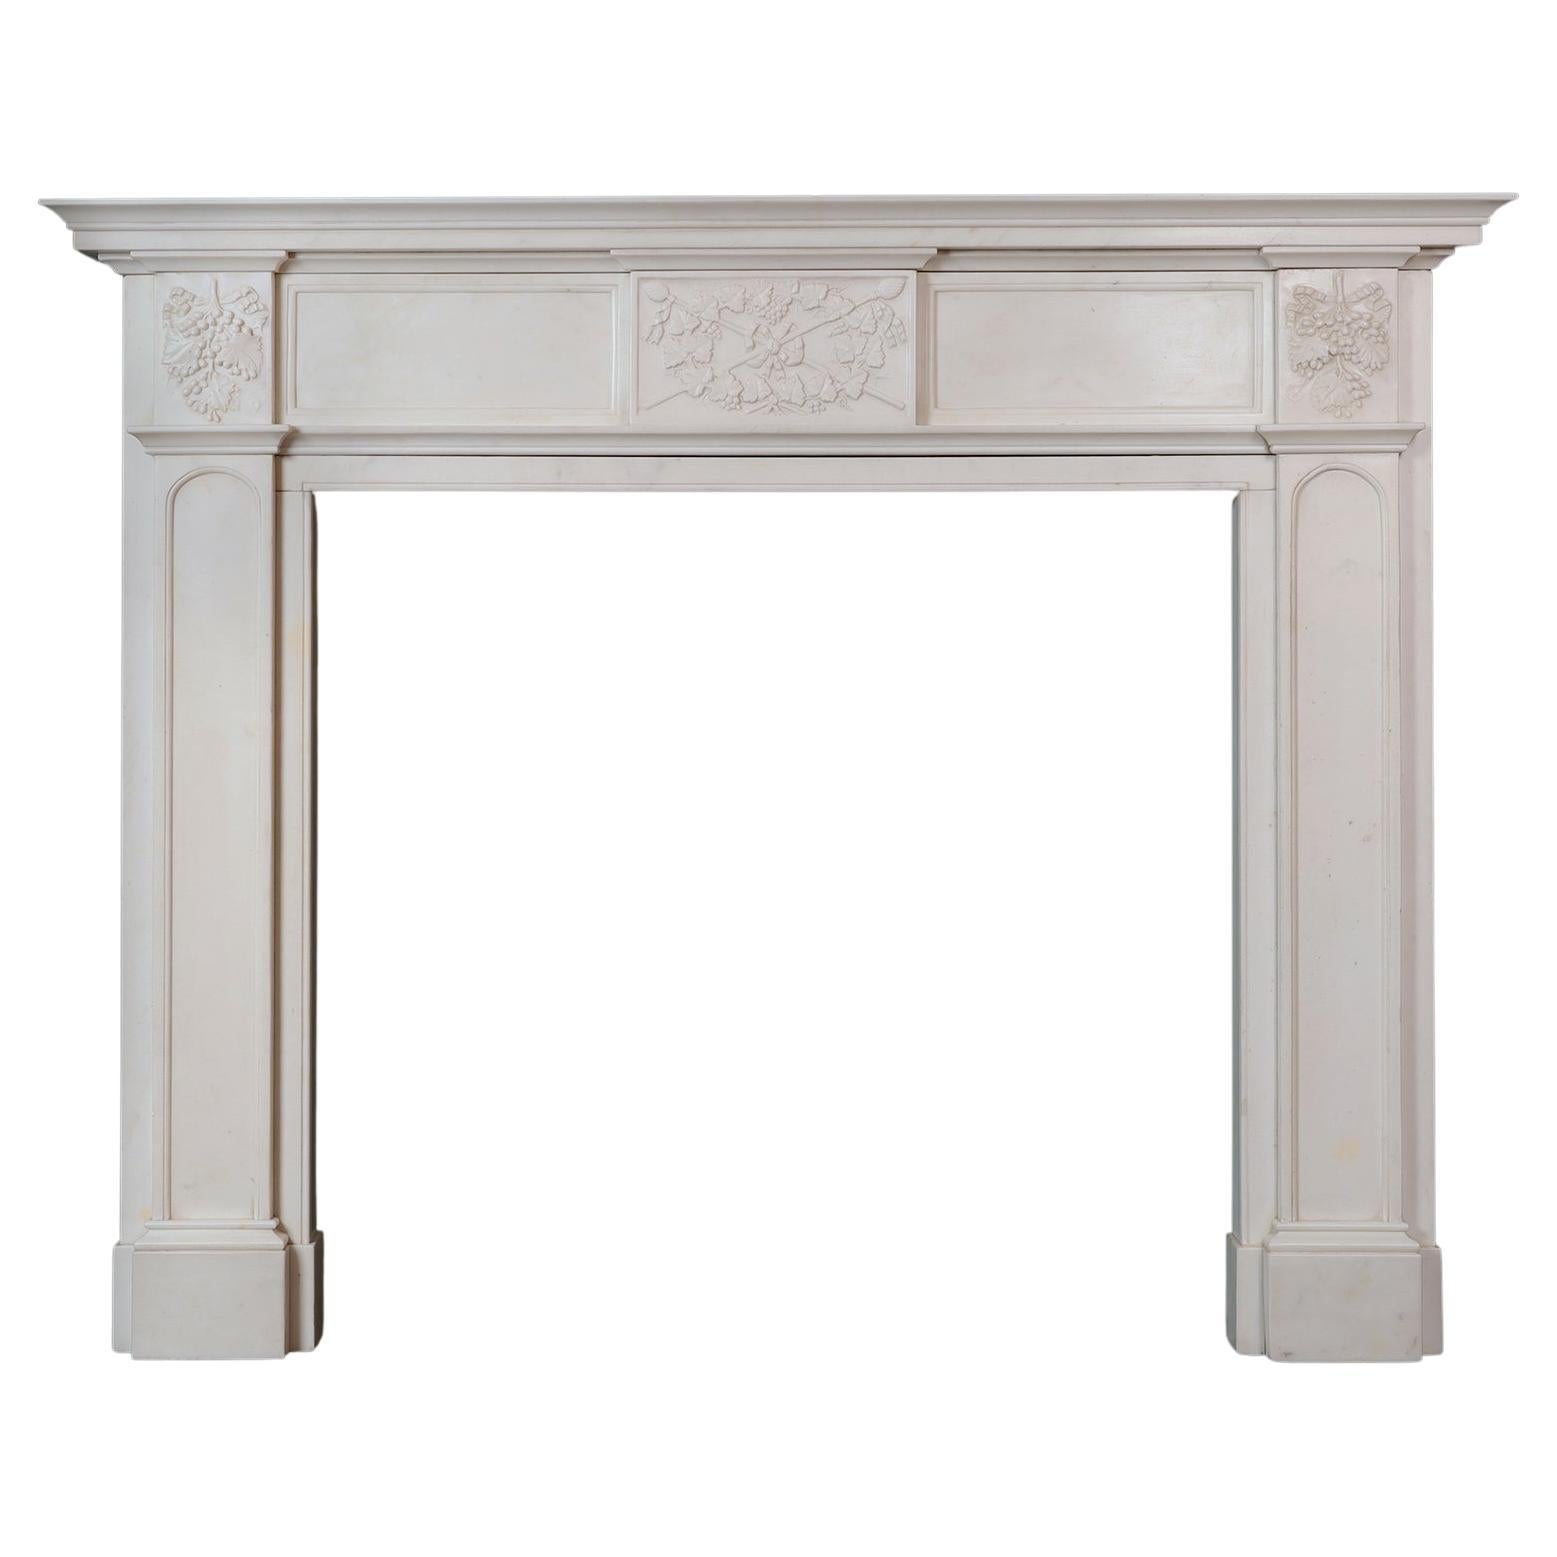 Antique English Statuary White Marble Fireplace Mantel For Sale